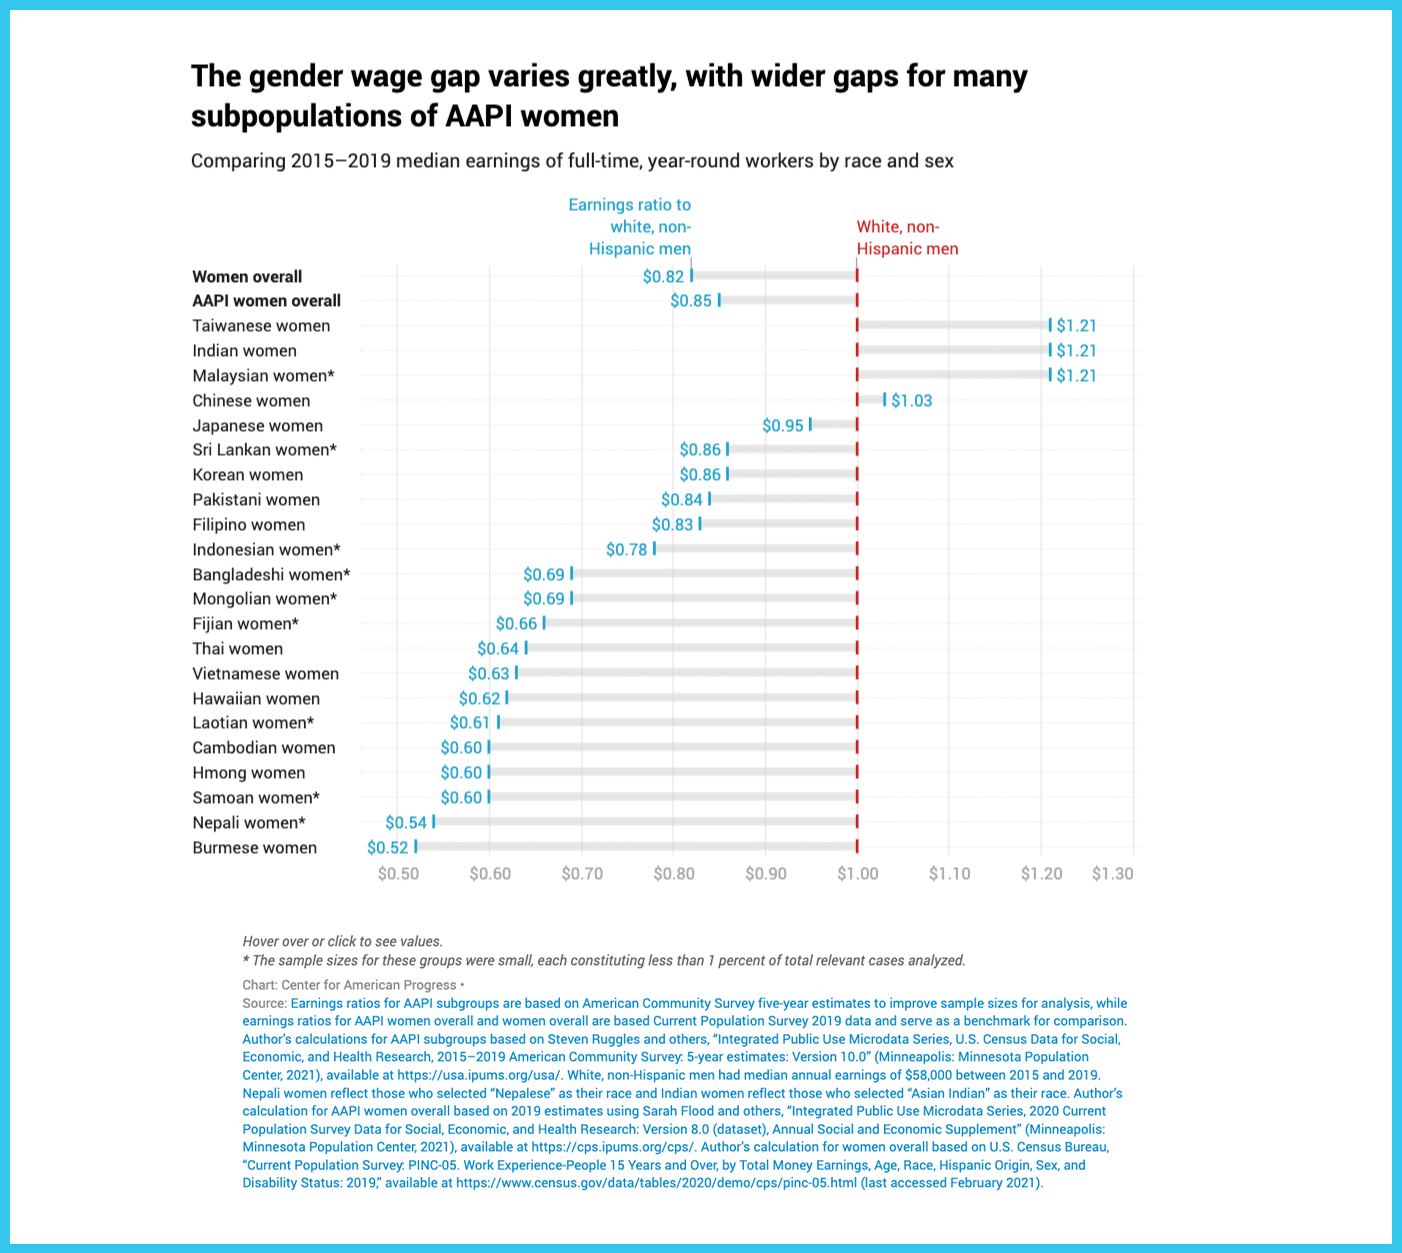 The gender wage gap varies greatly, with wider gaps for many subpopulations of AAPI women